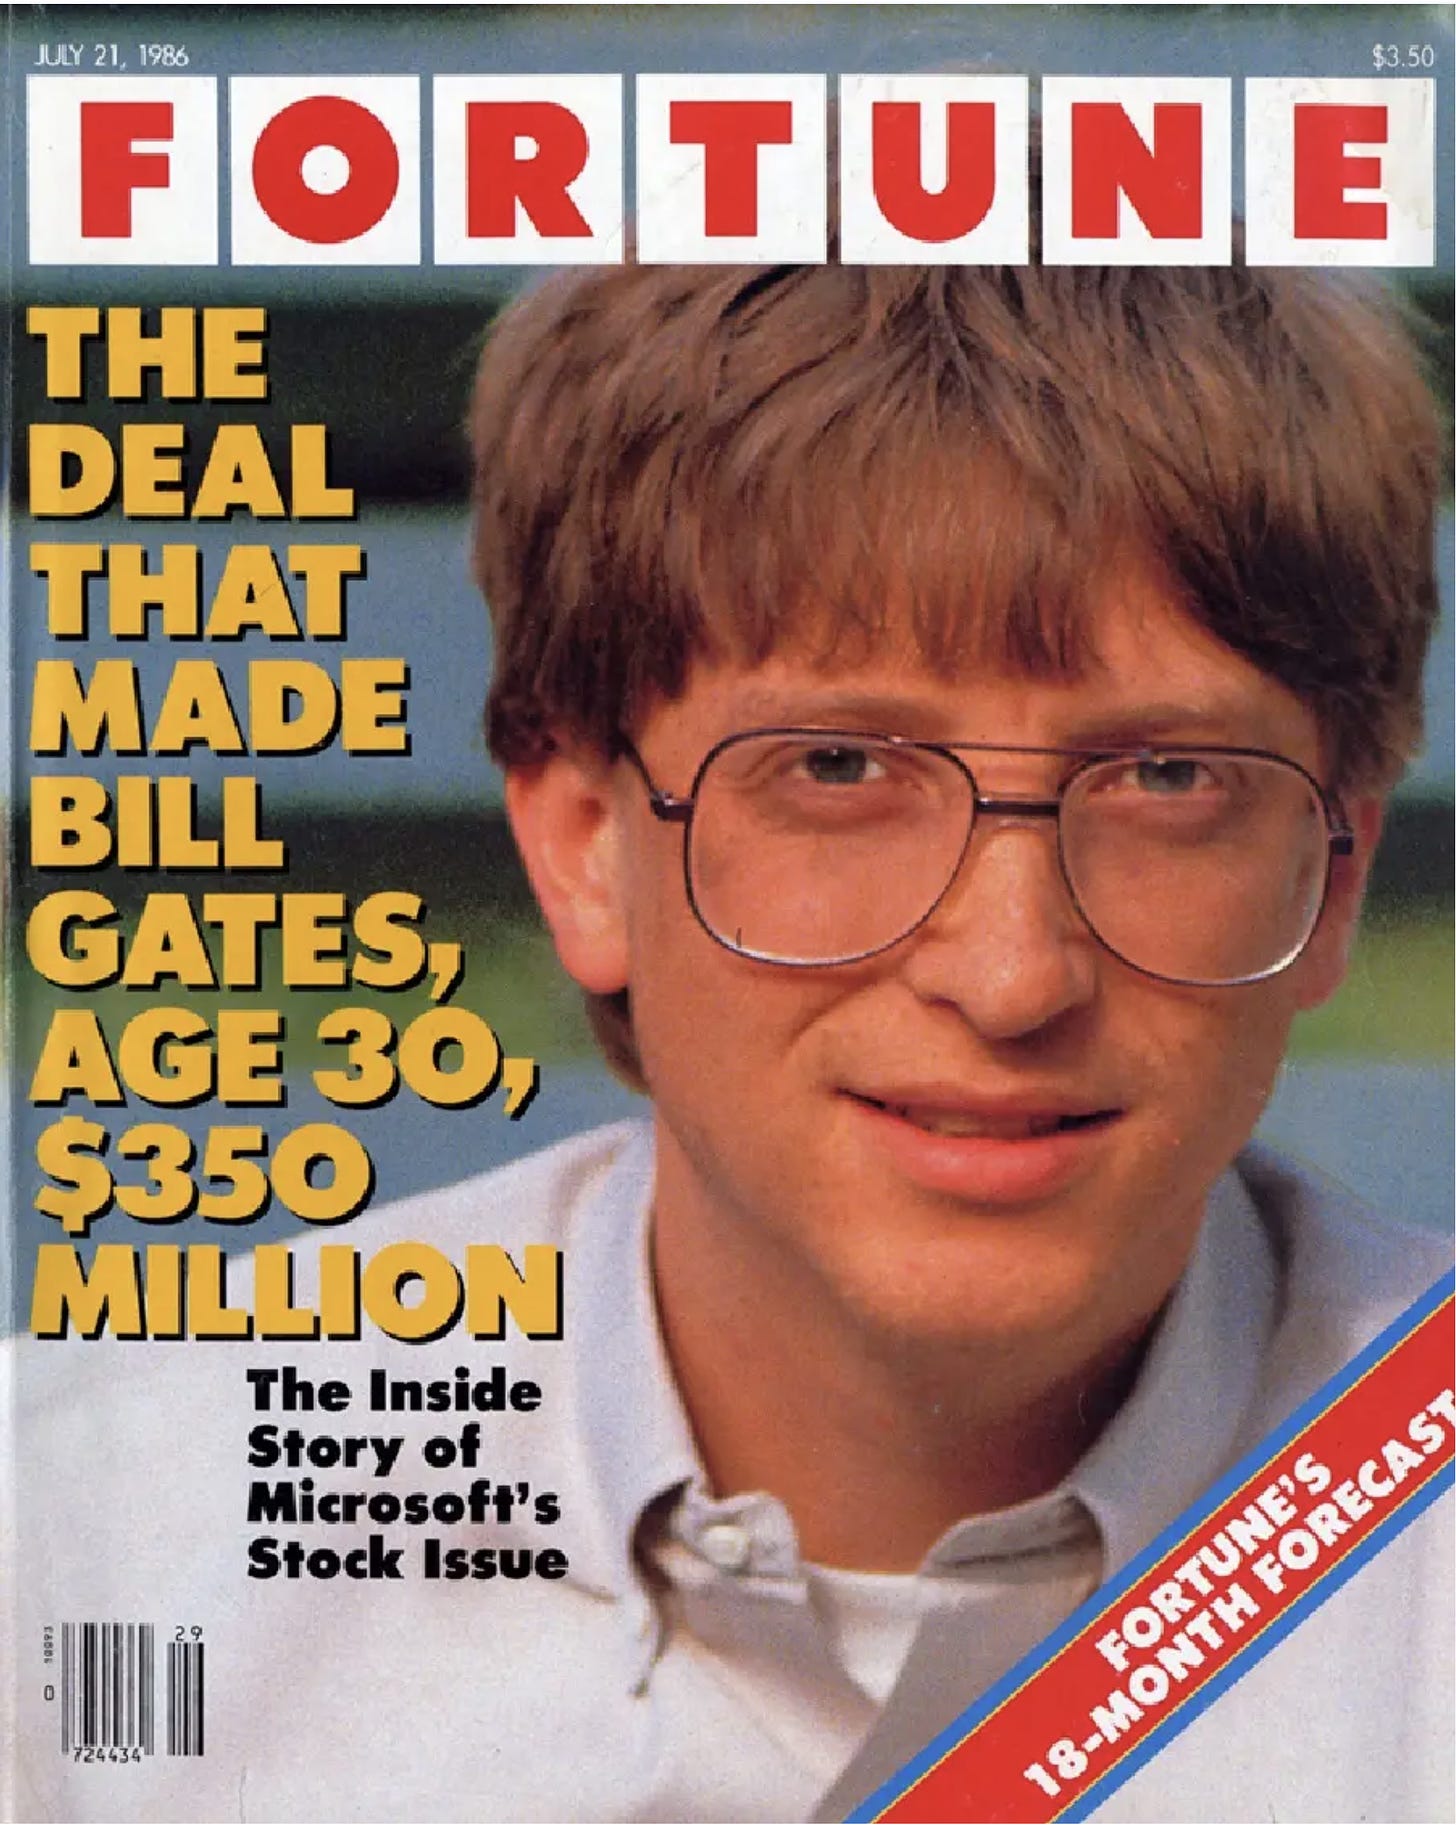 Fortune Magazine cover with photo of Bill. "The deal that made Bill Gates, Age 30, $350 Million" Inside the story of Microsoft's stock issue.